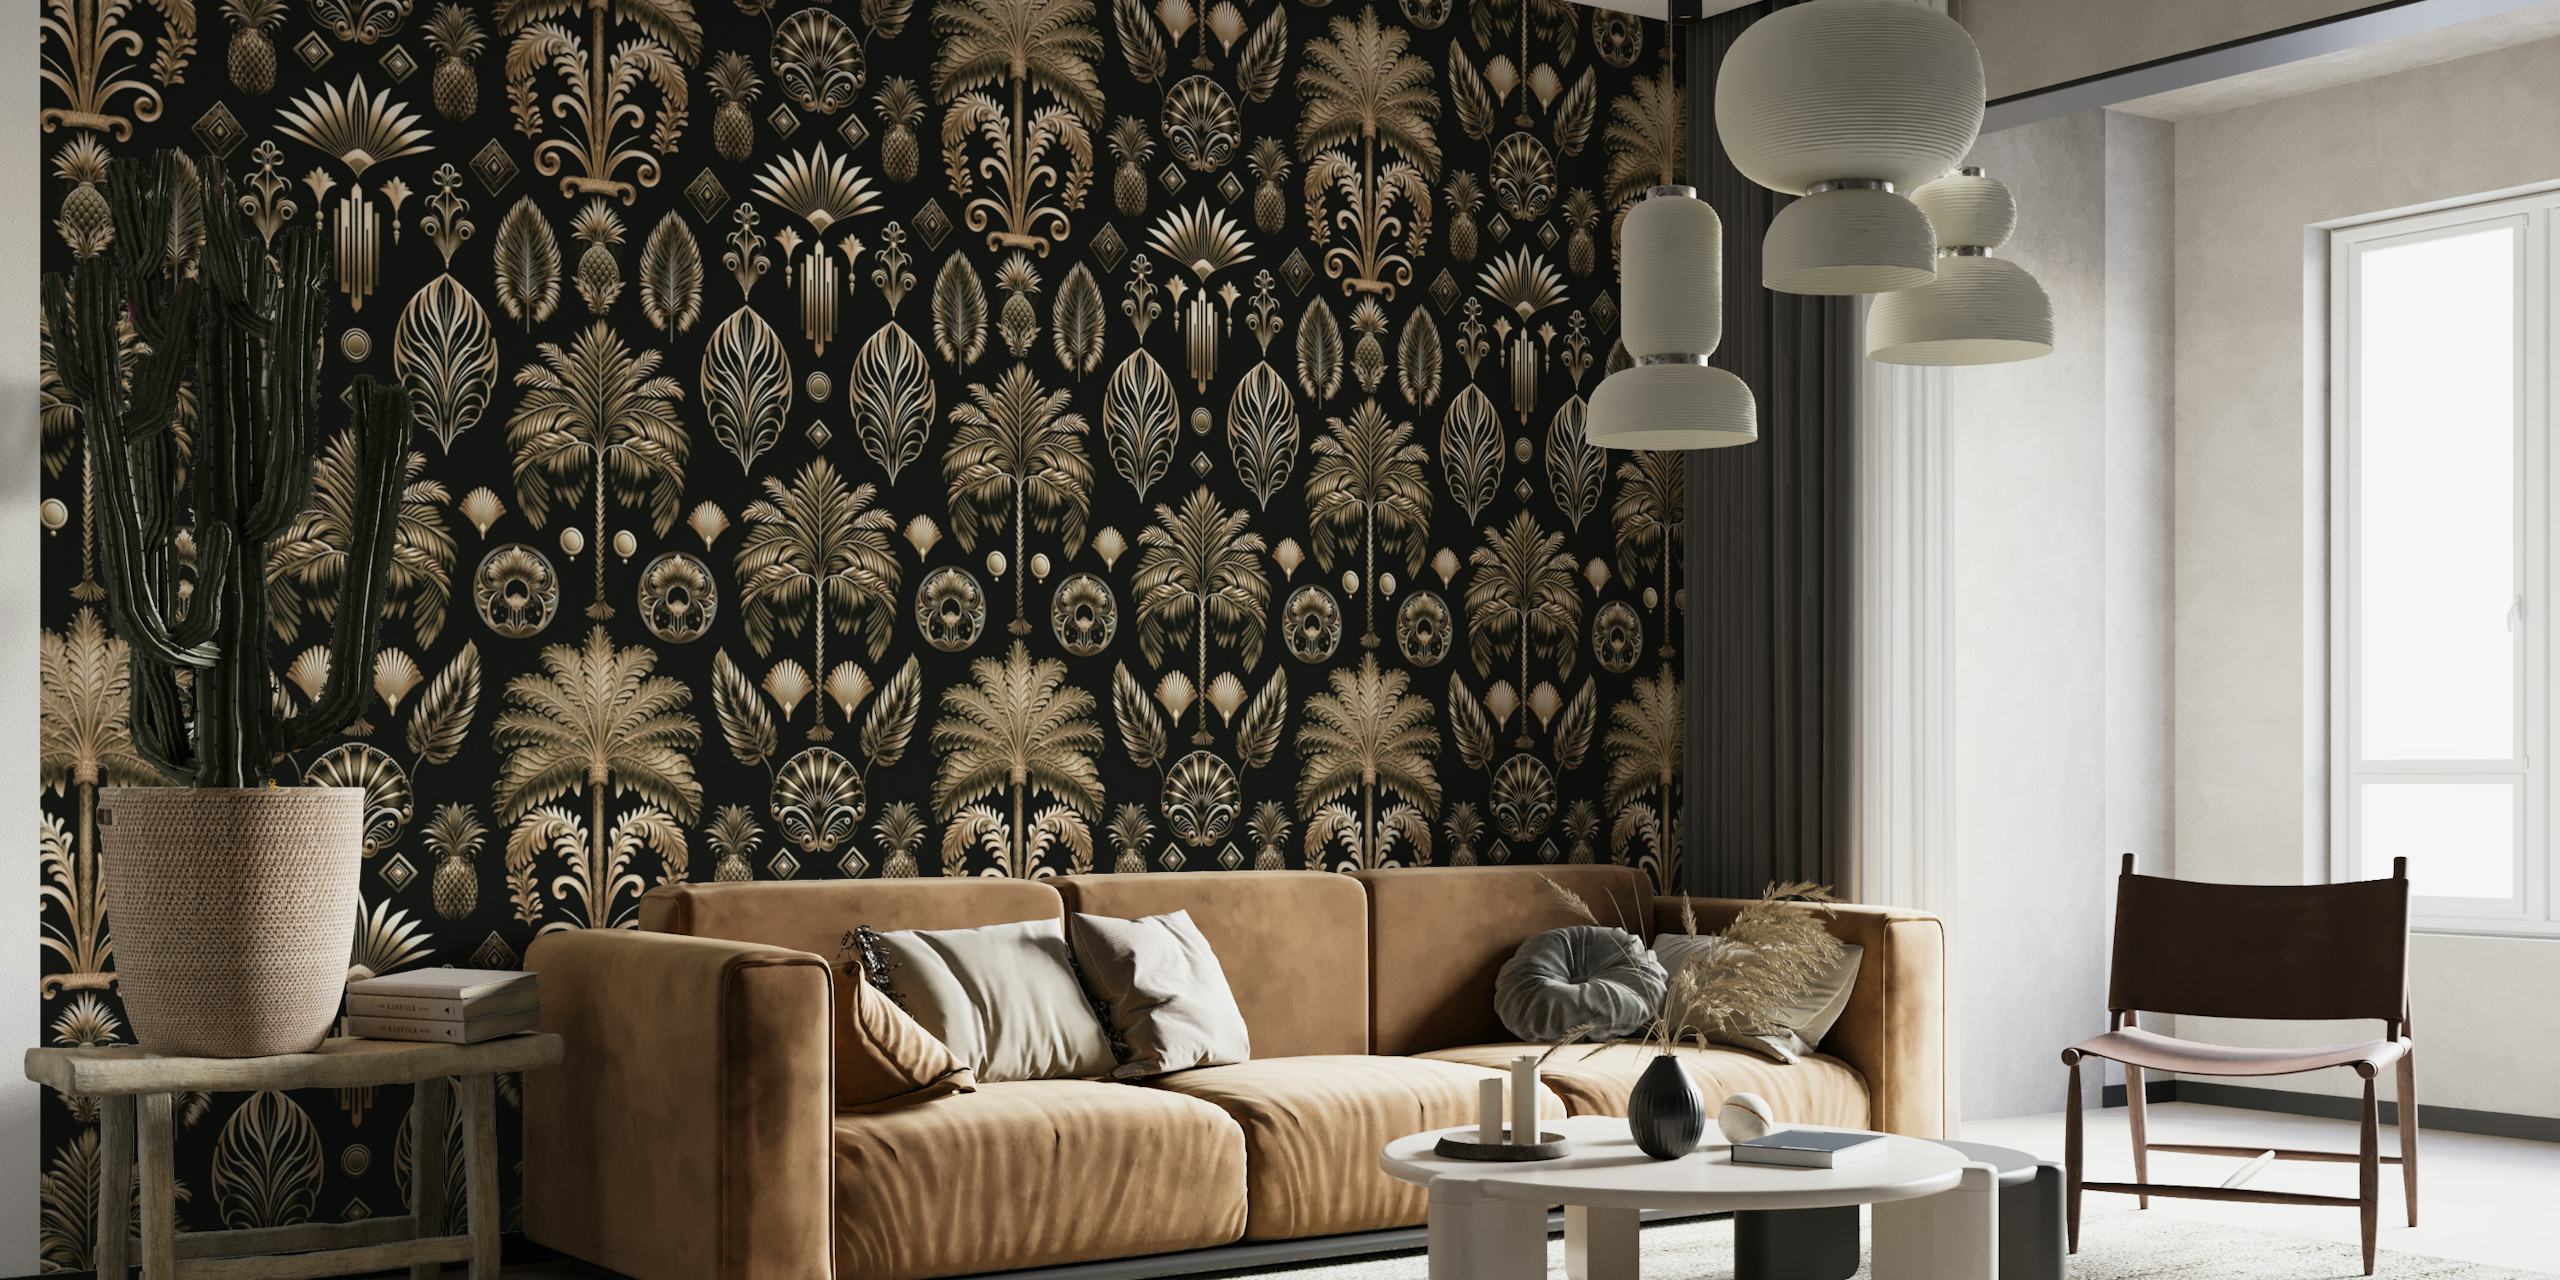 Exquisite Art Decor Design With Palm Trees And Ornamnts Gold On Black wallpaper